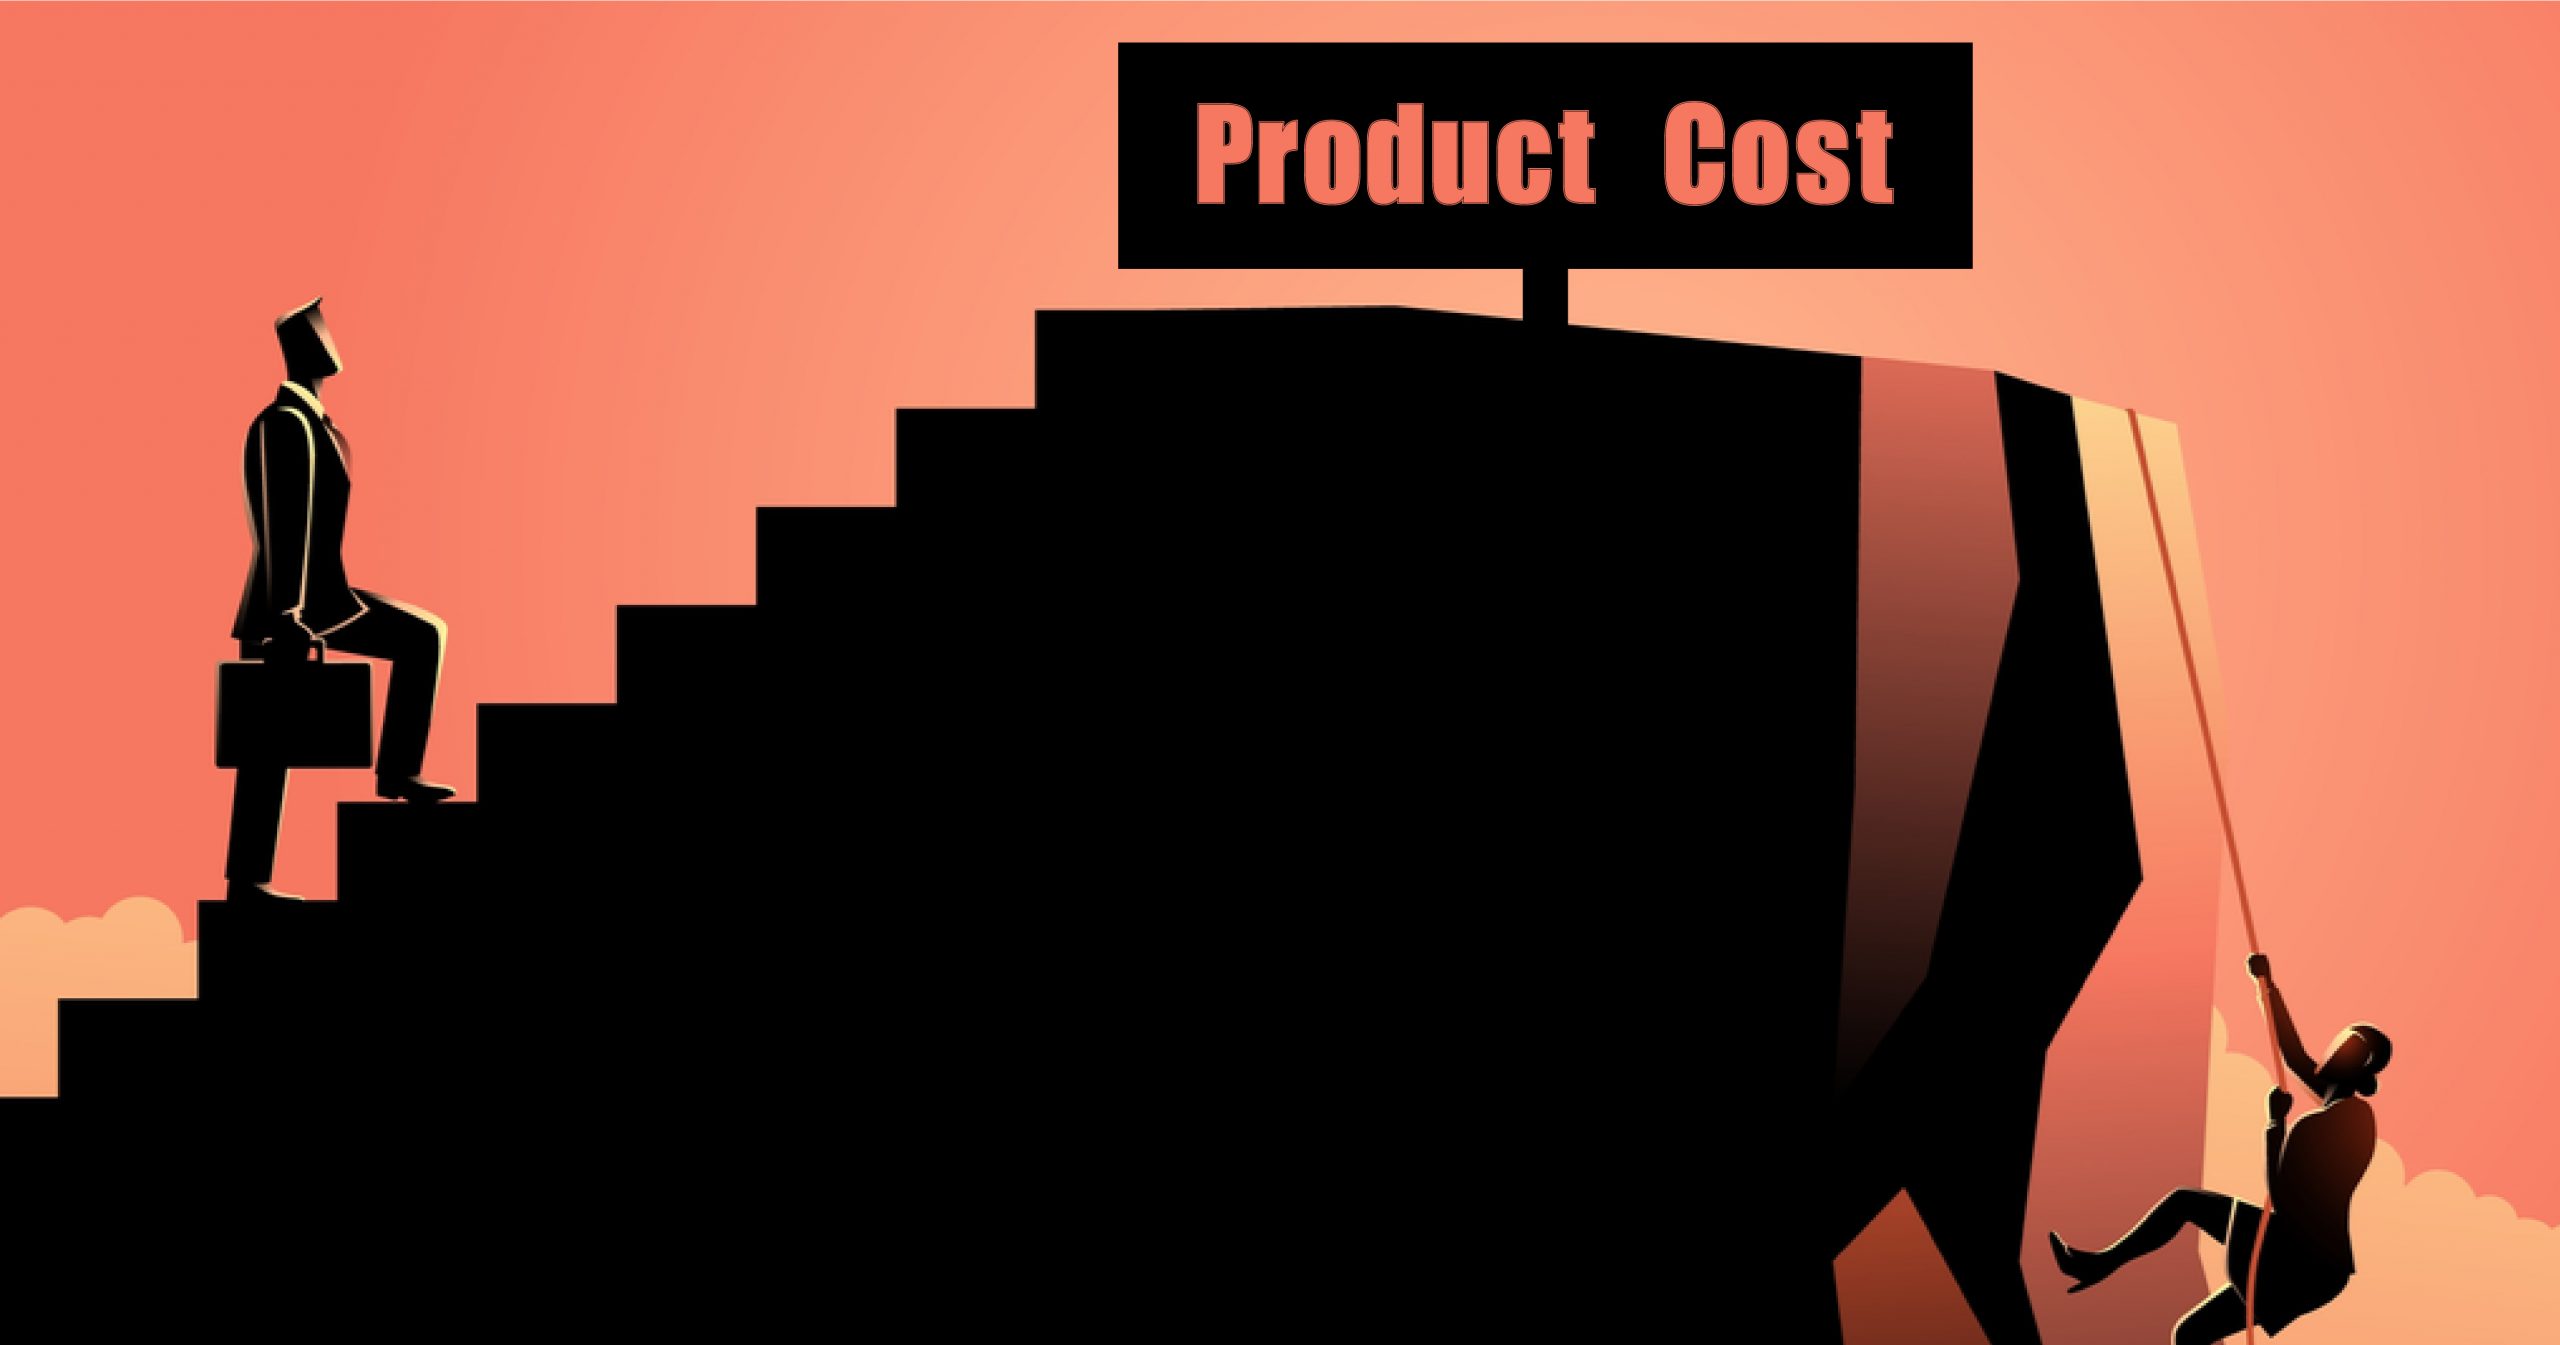 Product cost